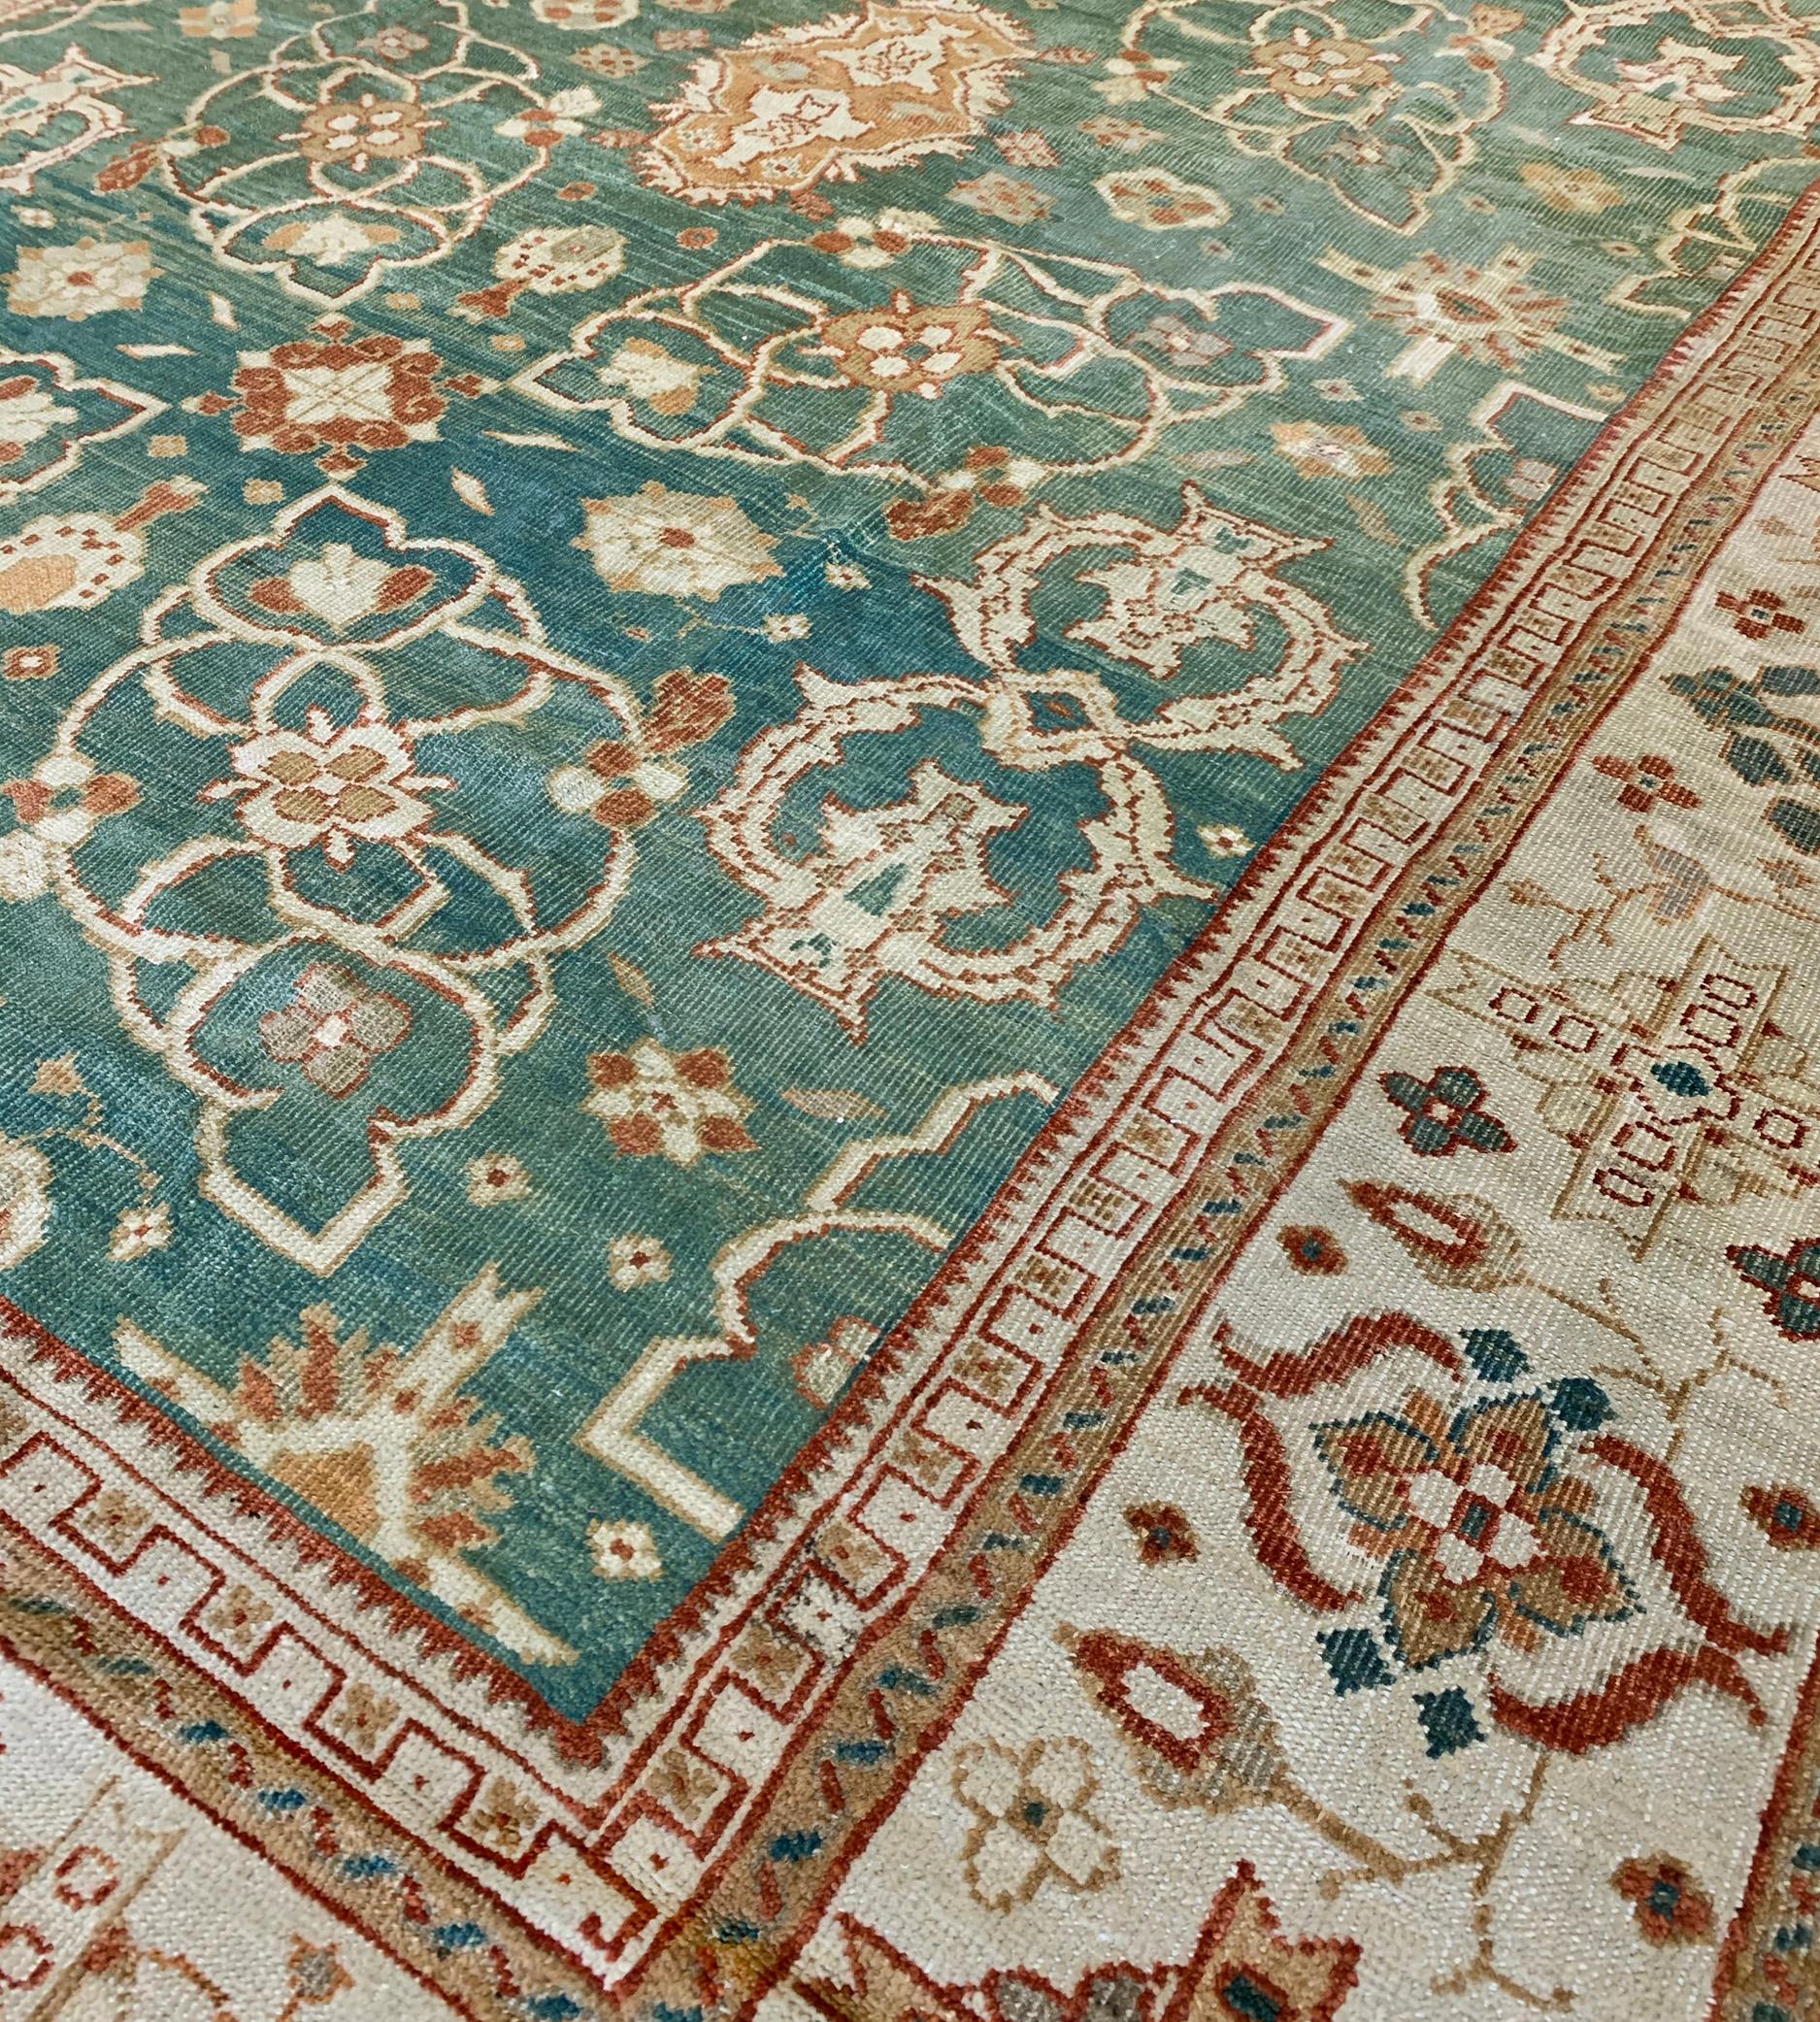 The shaded malachite field with a central column of brick-red and burnt-orange palmettes surrounded by ivory open floral cartouches, stylized linked vase motifs and minor further floral motifs, the broad ivory border with polychrome finely drawn